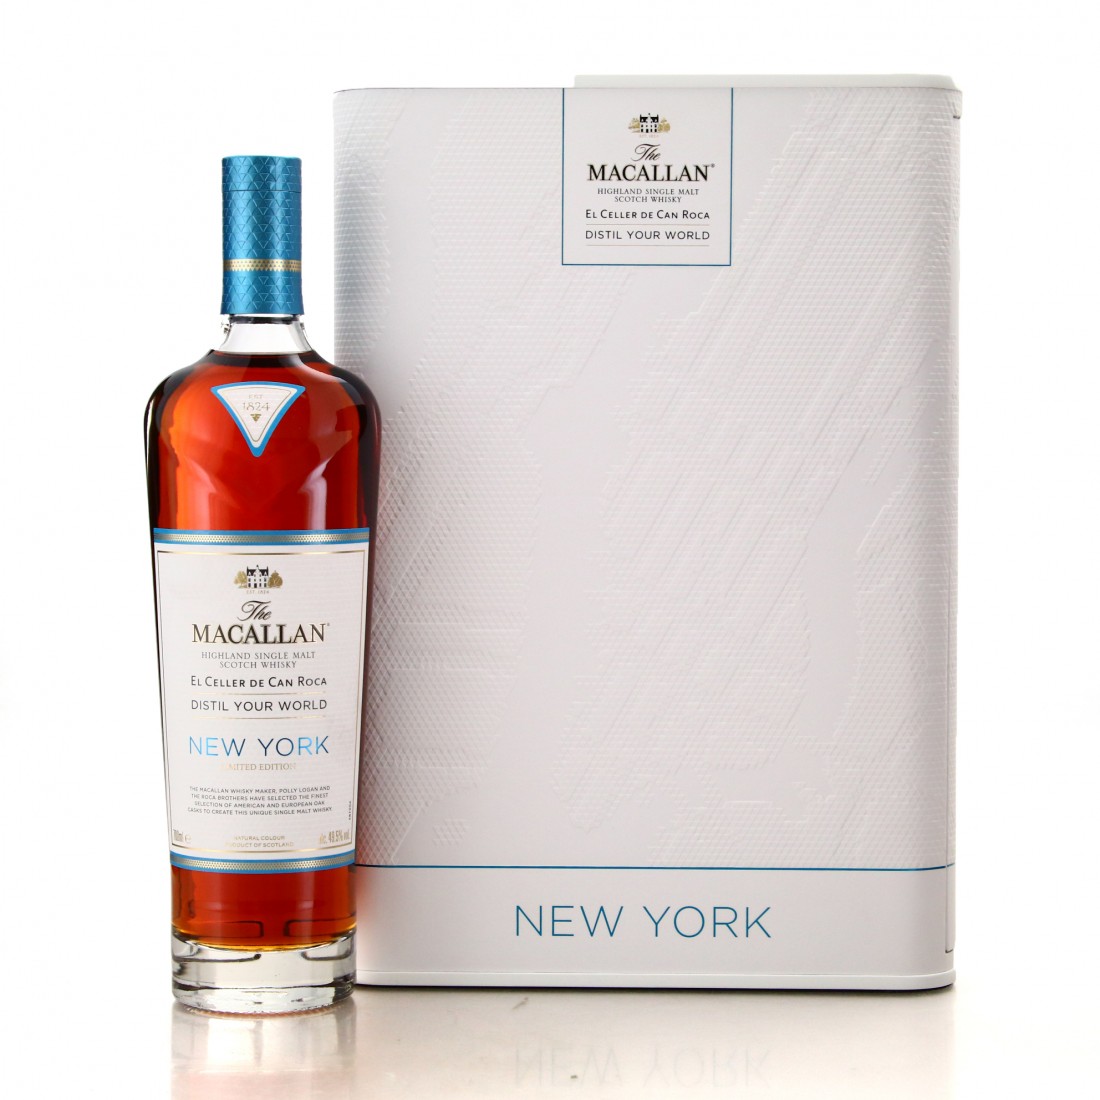 The Macallan released the second bottling in their travel exclusive Distil Your World series in 2022. The £2,500 RRP New York bottle peaked at just over £20,000 at auction in May.